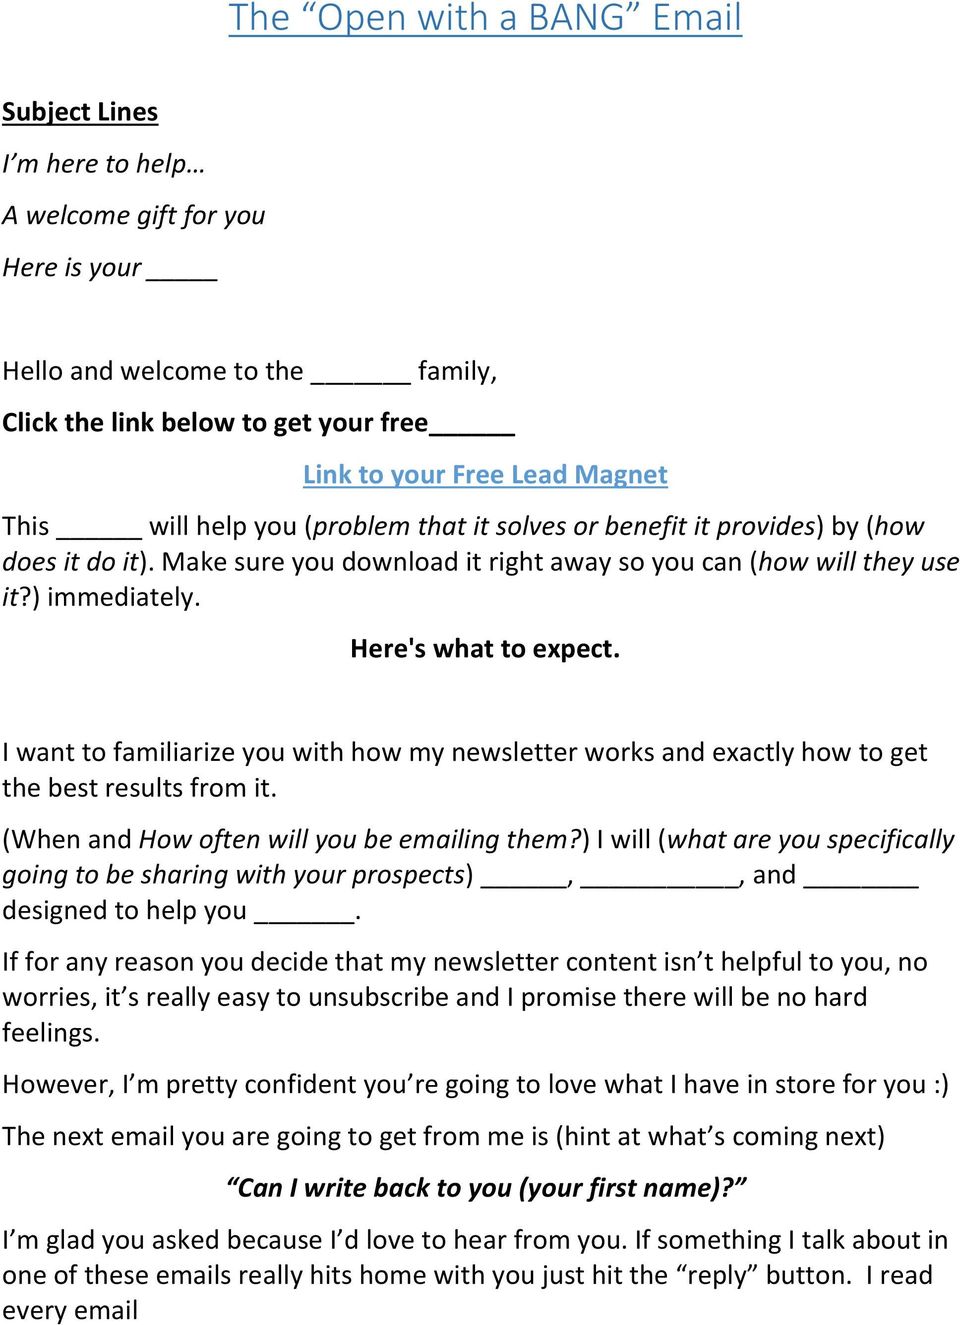 I want to familiarize you with how my newsletter works and exactly how to get the best results from it. (When and How often will you be emailing them?